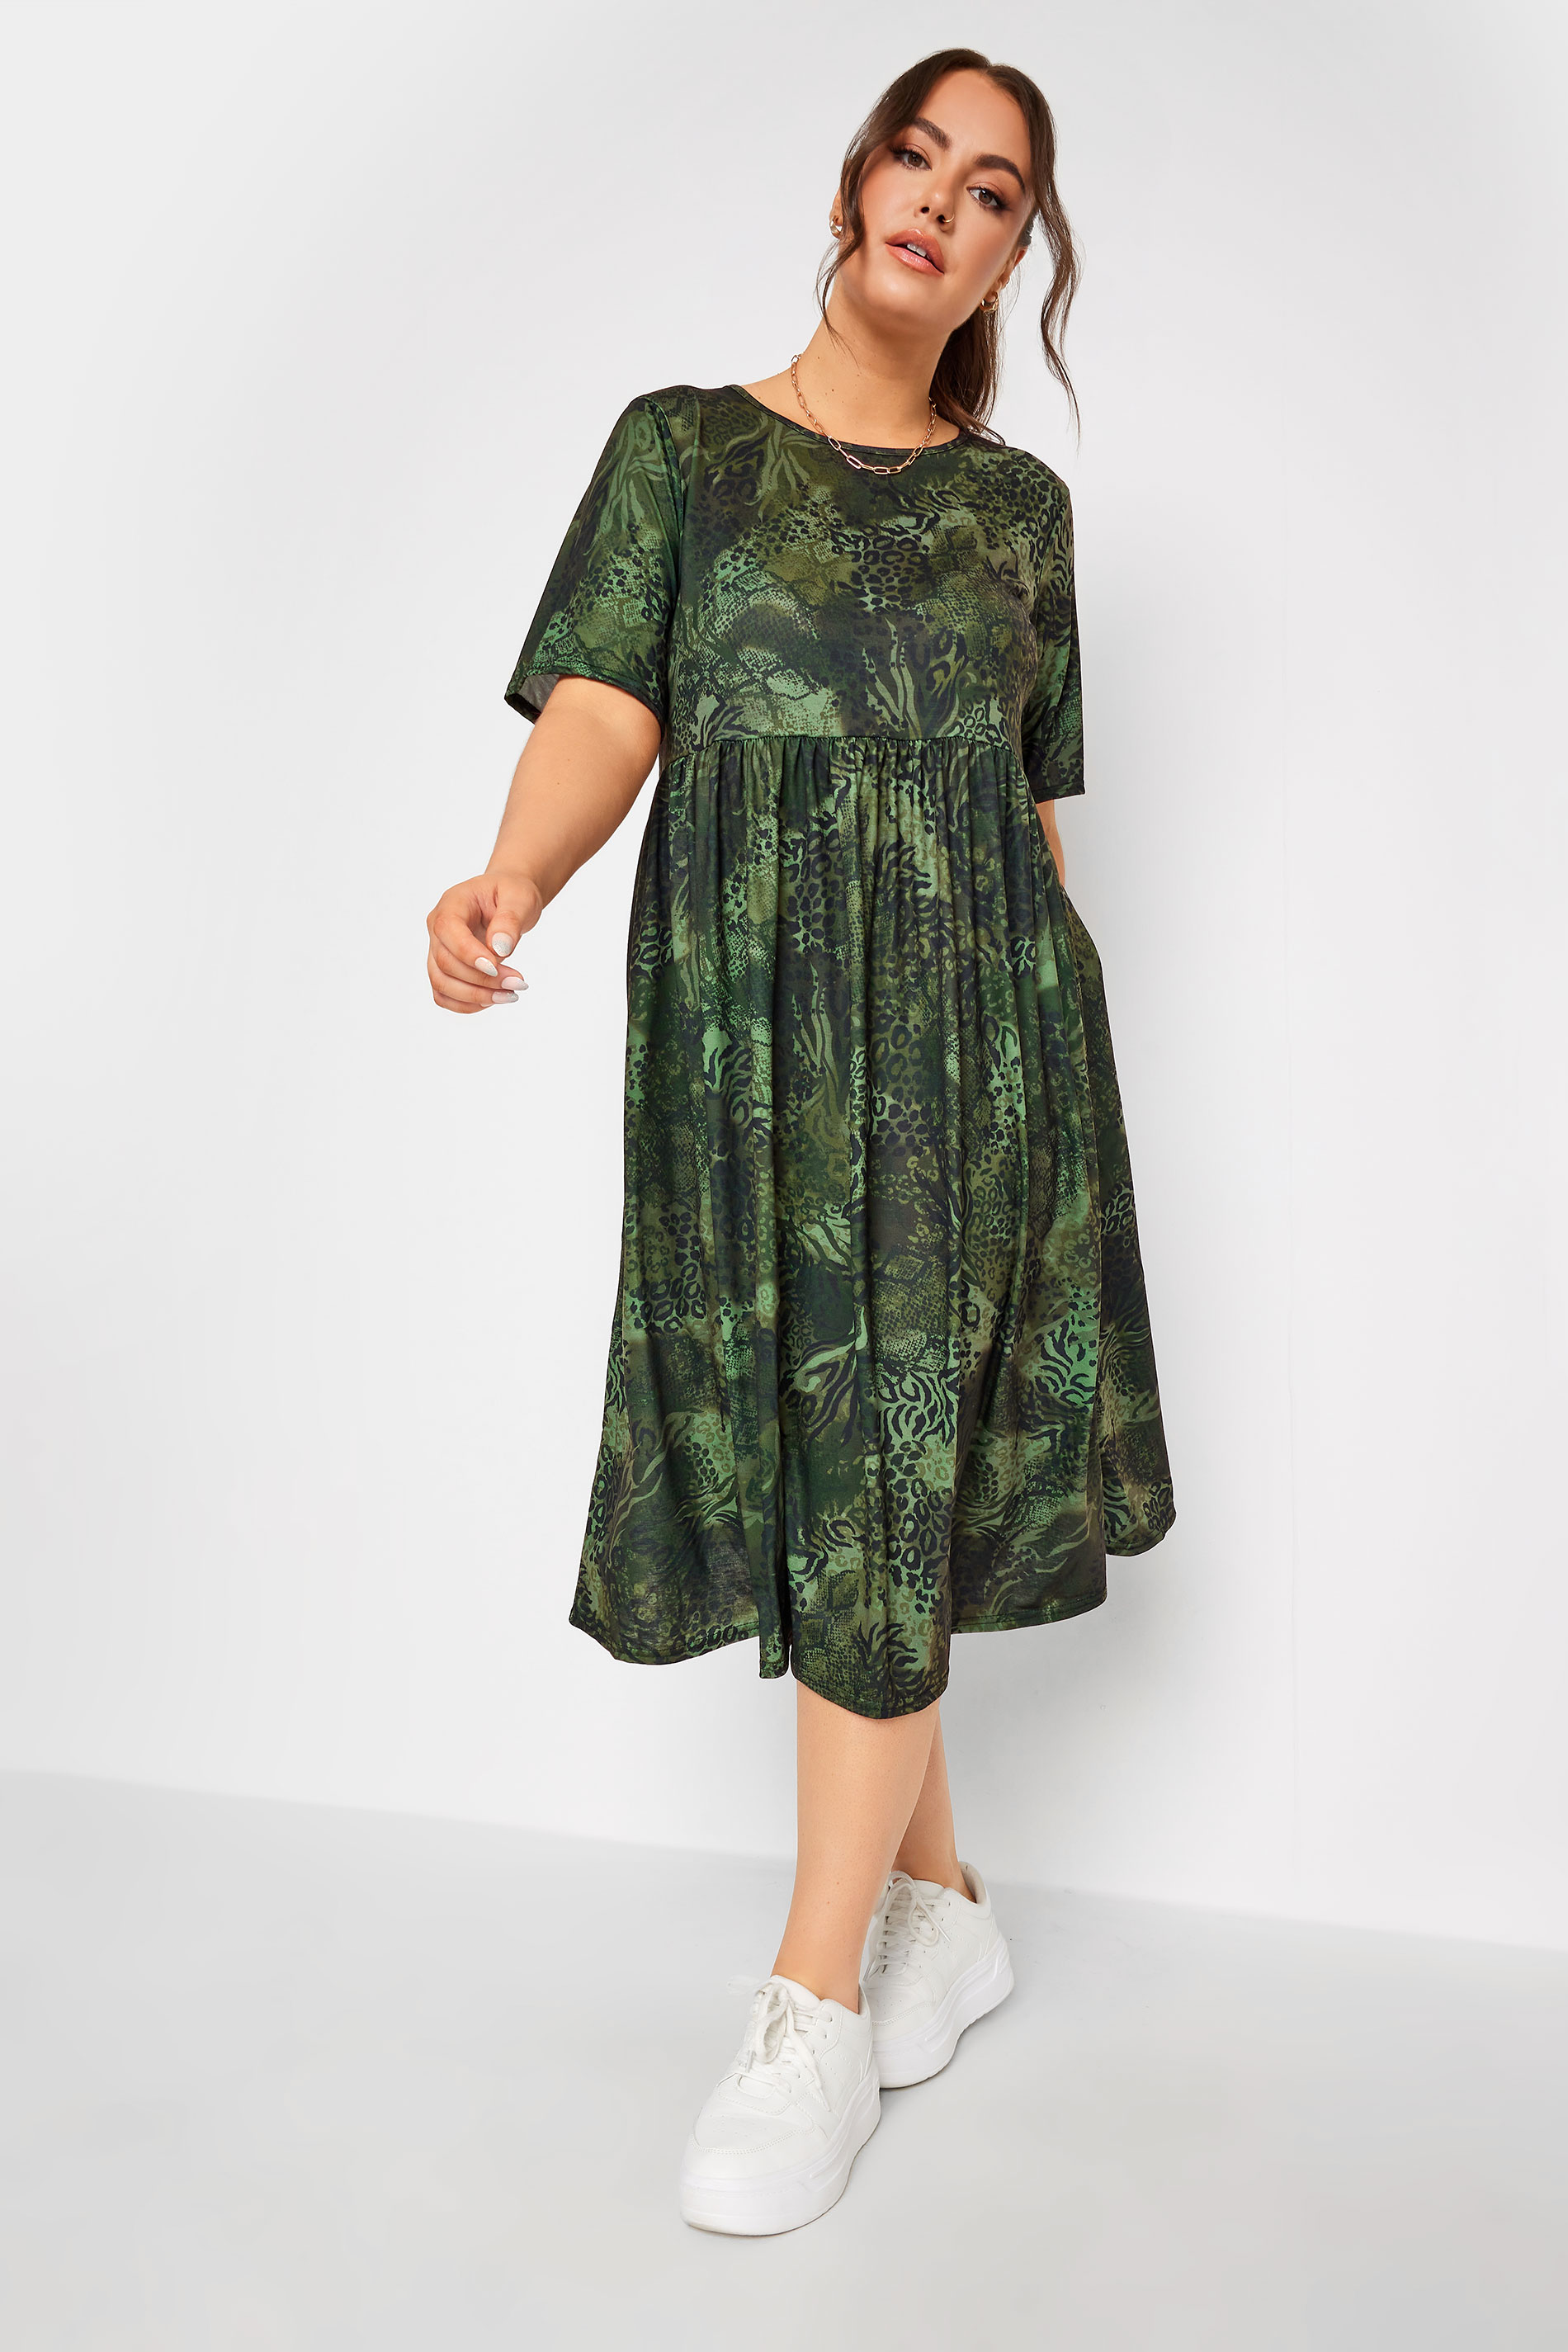 LIMITED COLLECTION Curve Plus Size Green Animal Print Smock Midaxi Dress | Yours Clothing  3